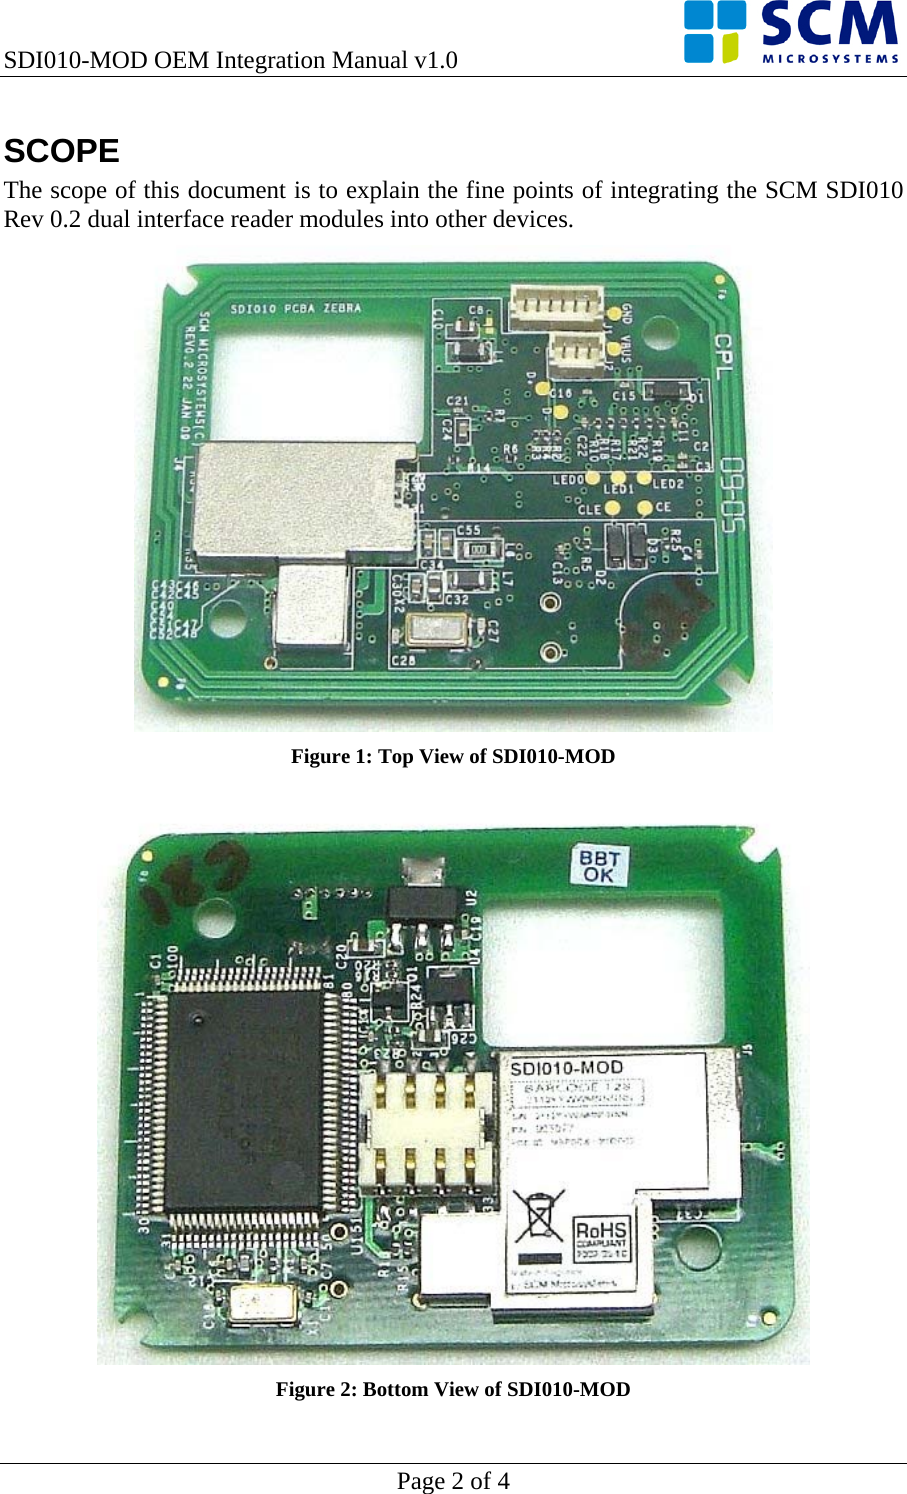 SDI010-MOD OEM Integration Manual v1.0    Page 2 of 4 SCOPE The scope of this document is to explain the fine points of integrating the SCM SDI010 Rev 0.2 dual interface reader modules into other devices.  Figure 1: Top View of SDI010-MOD   Figure 2: Bottom View of SDI010-MOD 